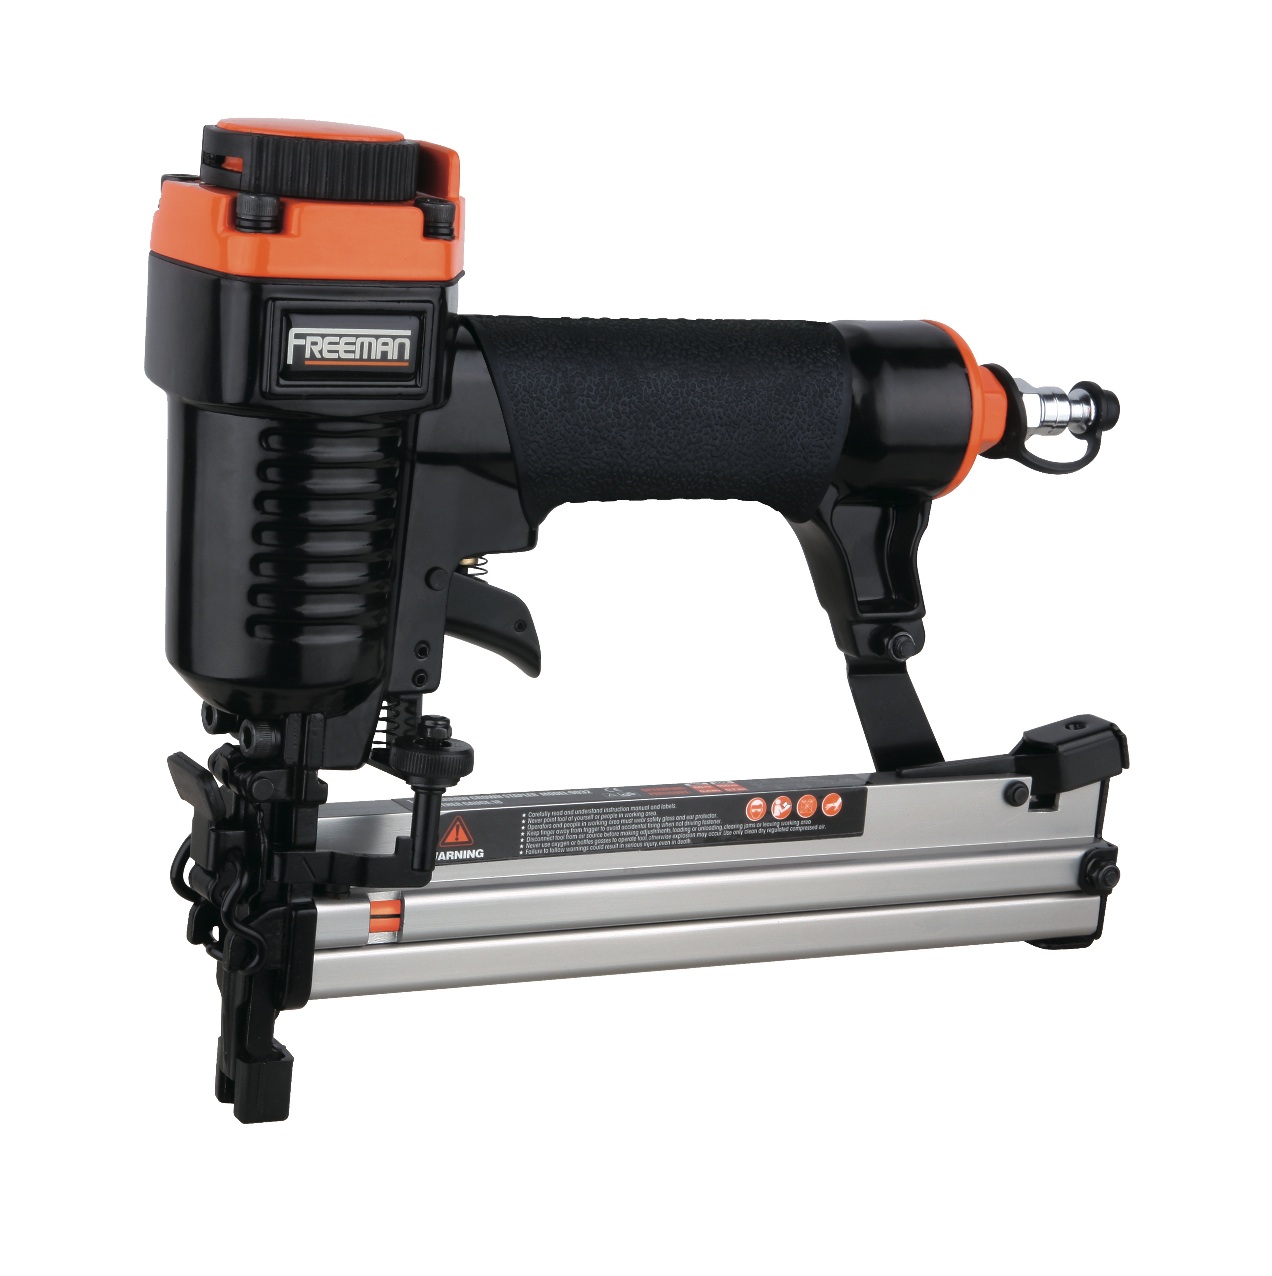 Pst9032q 11.7 X 9.3 X 3" Narrow Crown Stapler With Quick Jam Release And Depth Adjust